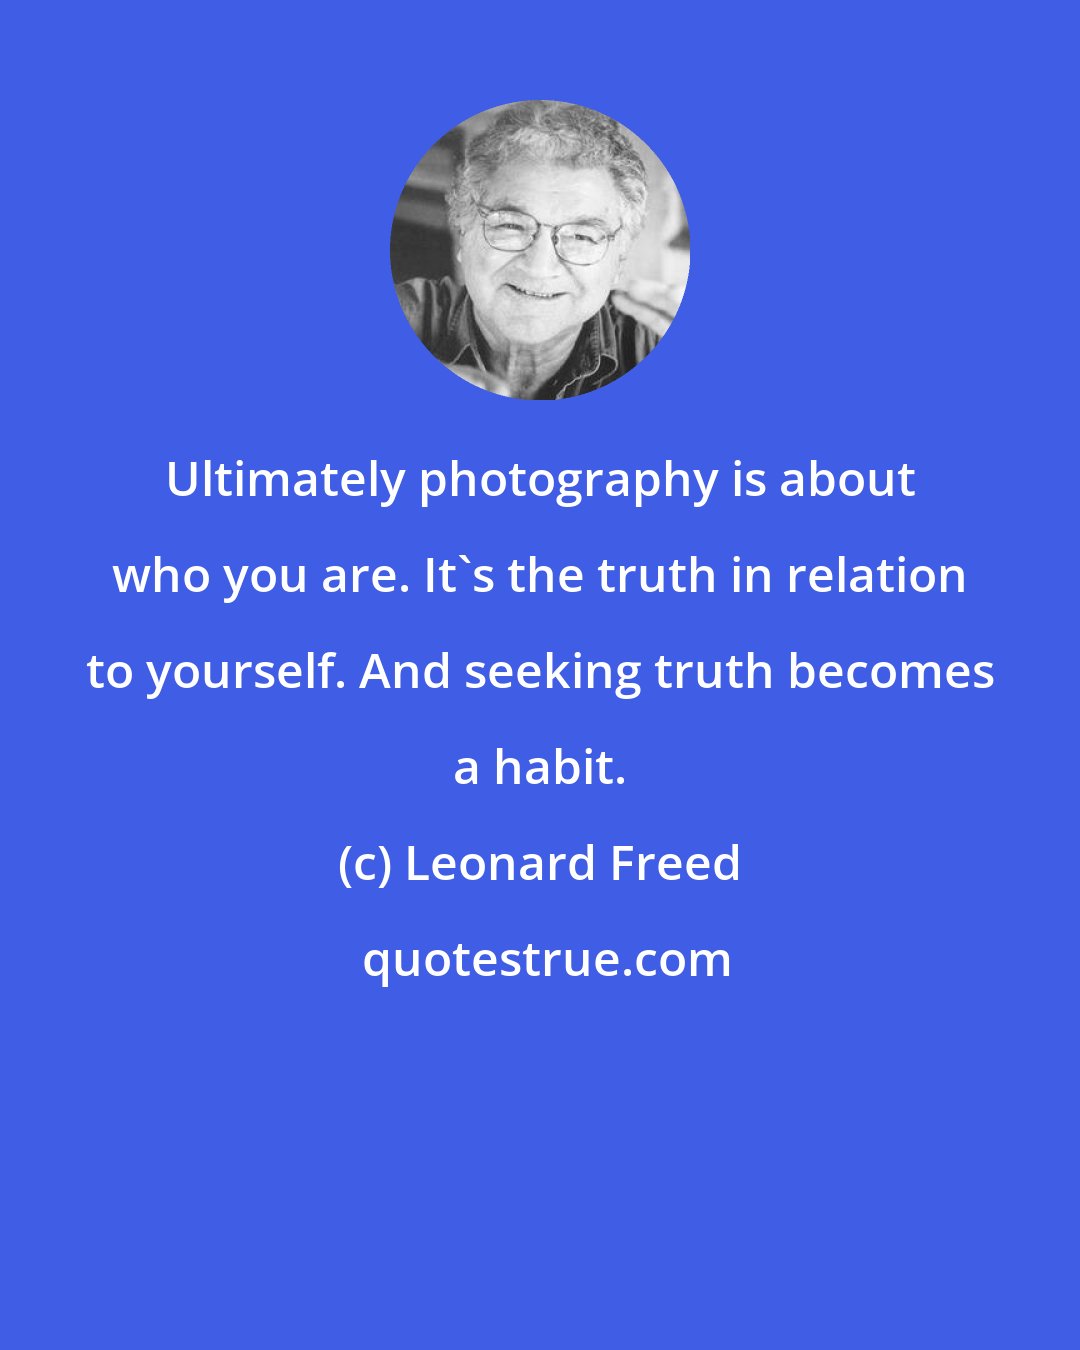 Leonard Freed: Ultimately photography is about who you are. It's the truth in relation to yourself. And seeking truth becomes a habit.